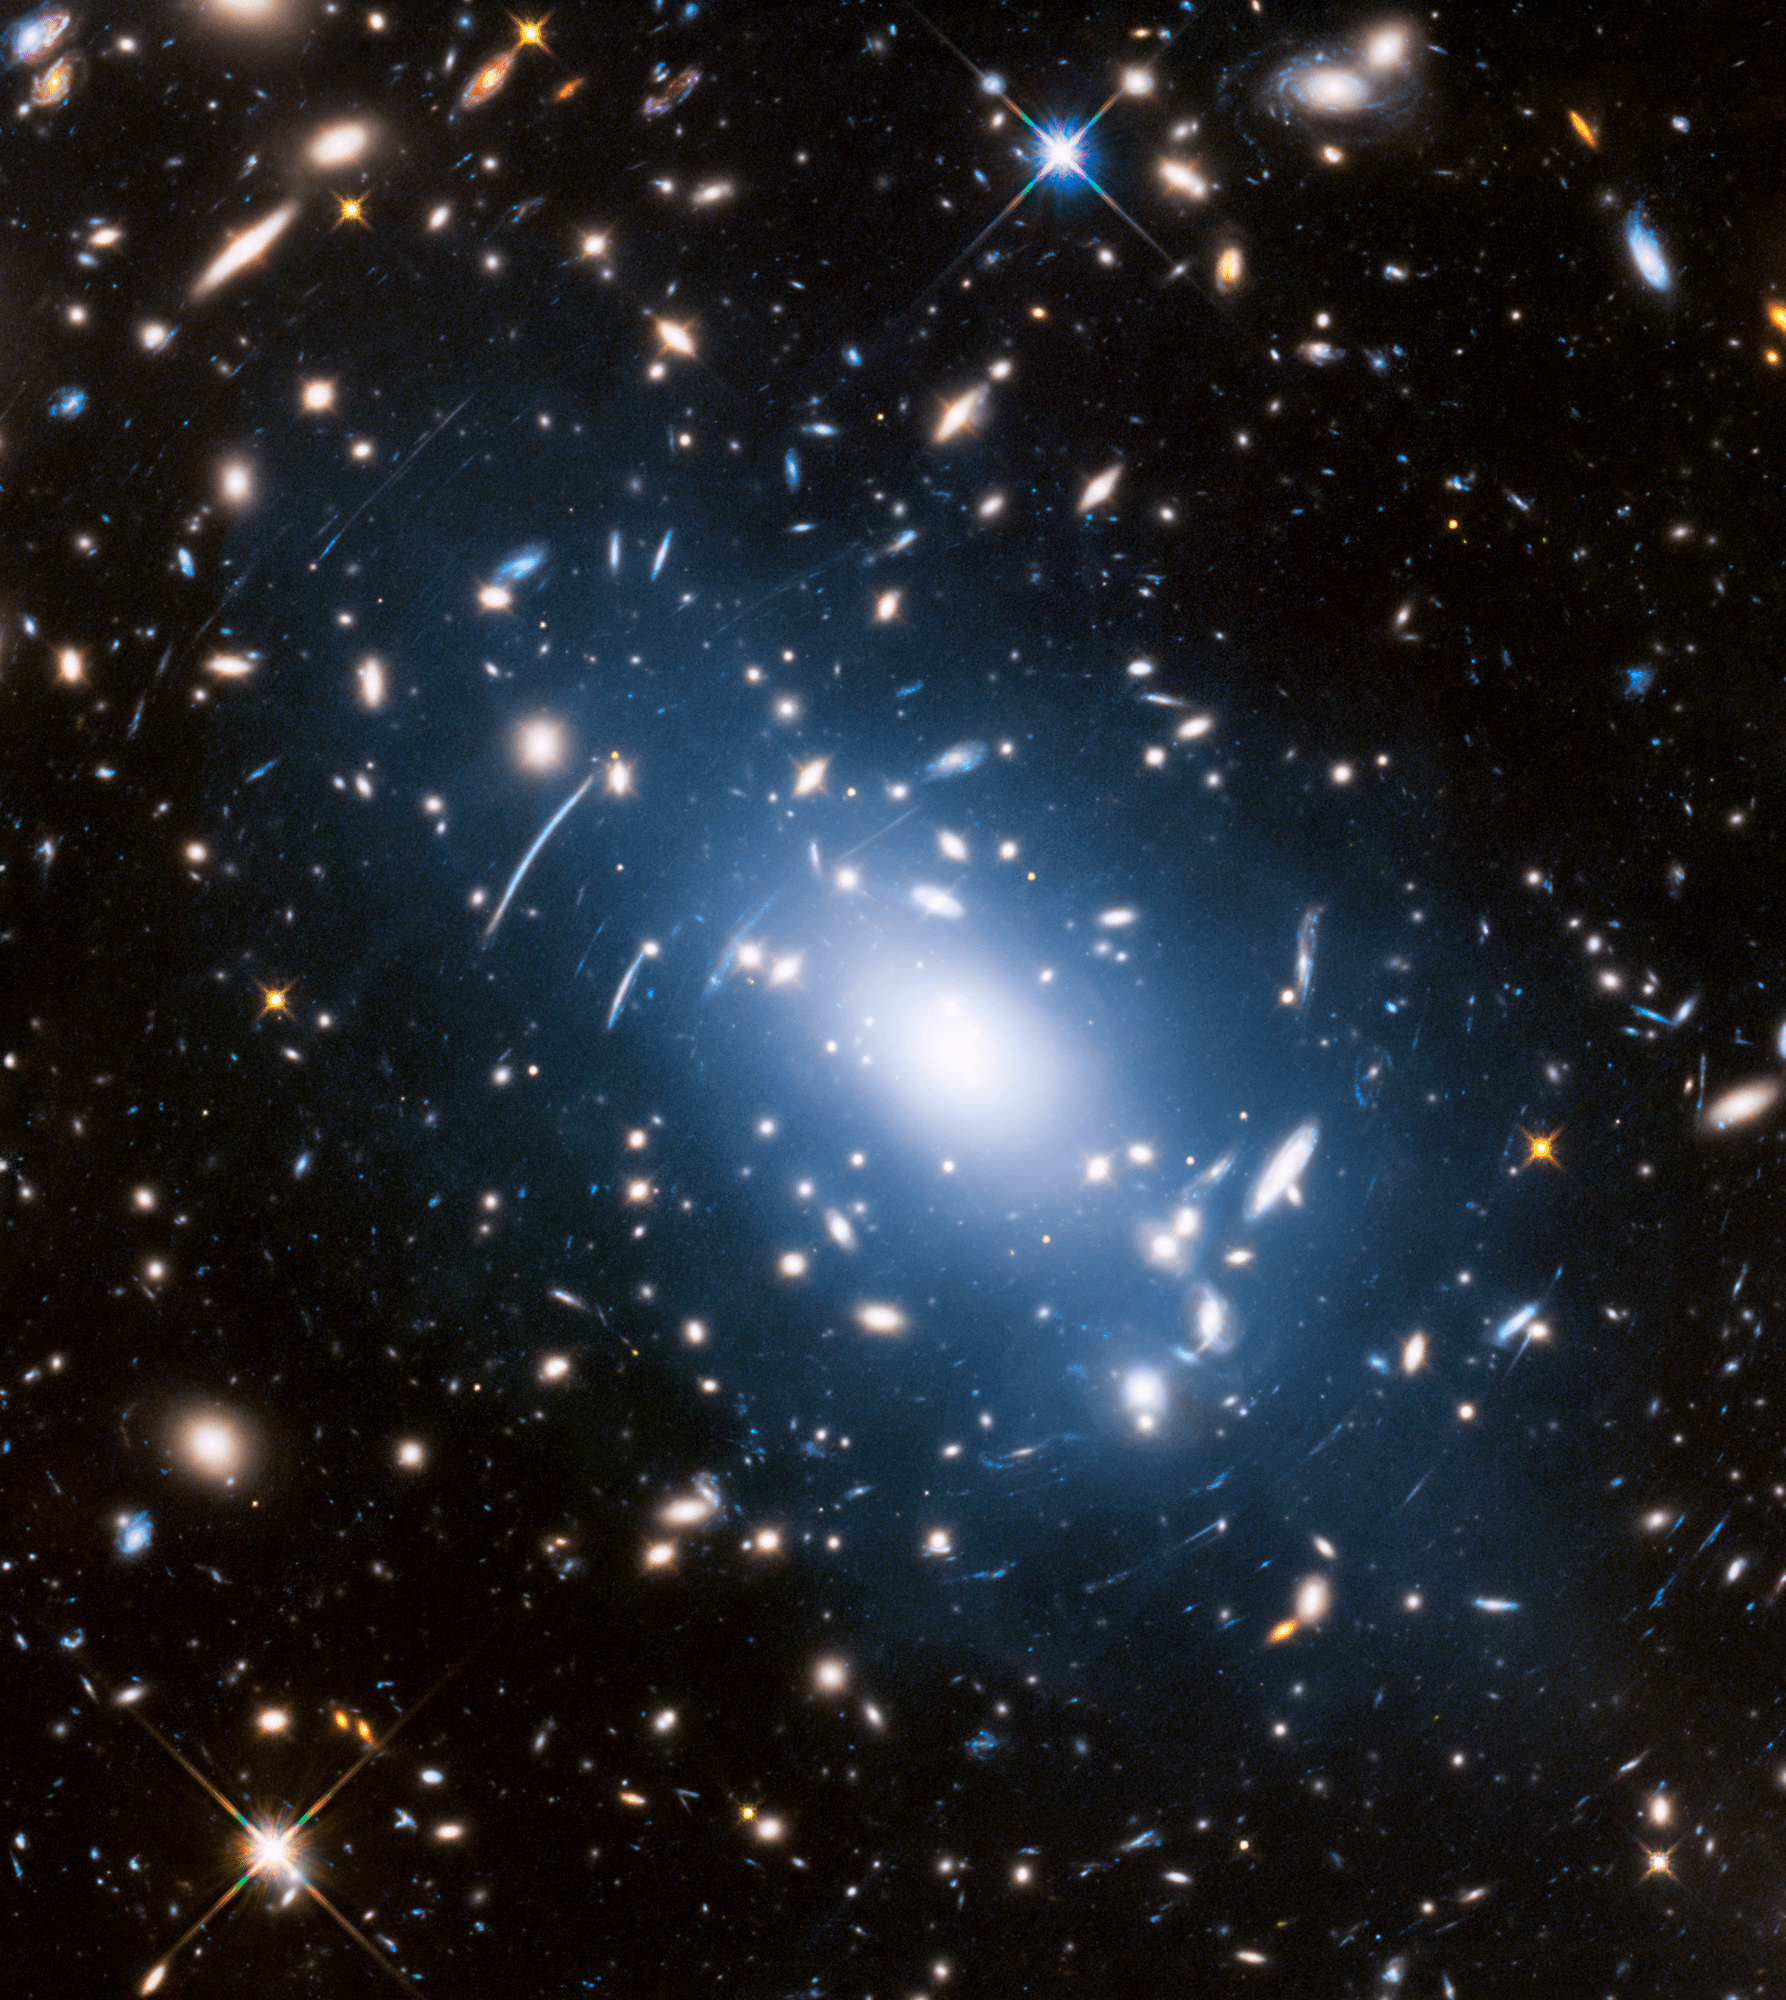 galaxy cluster bathed in blue light